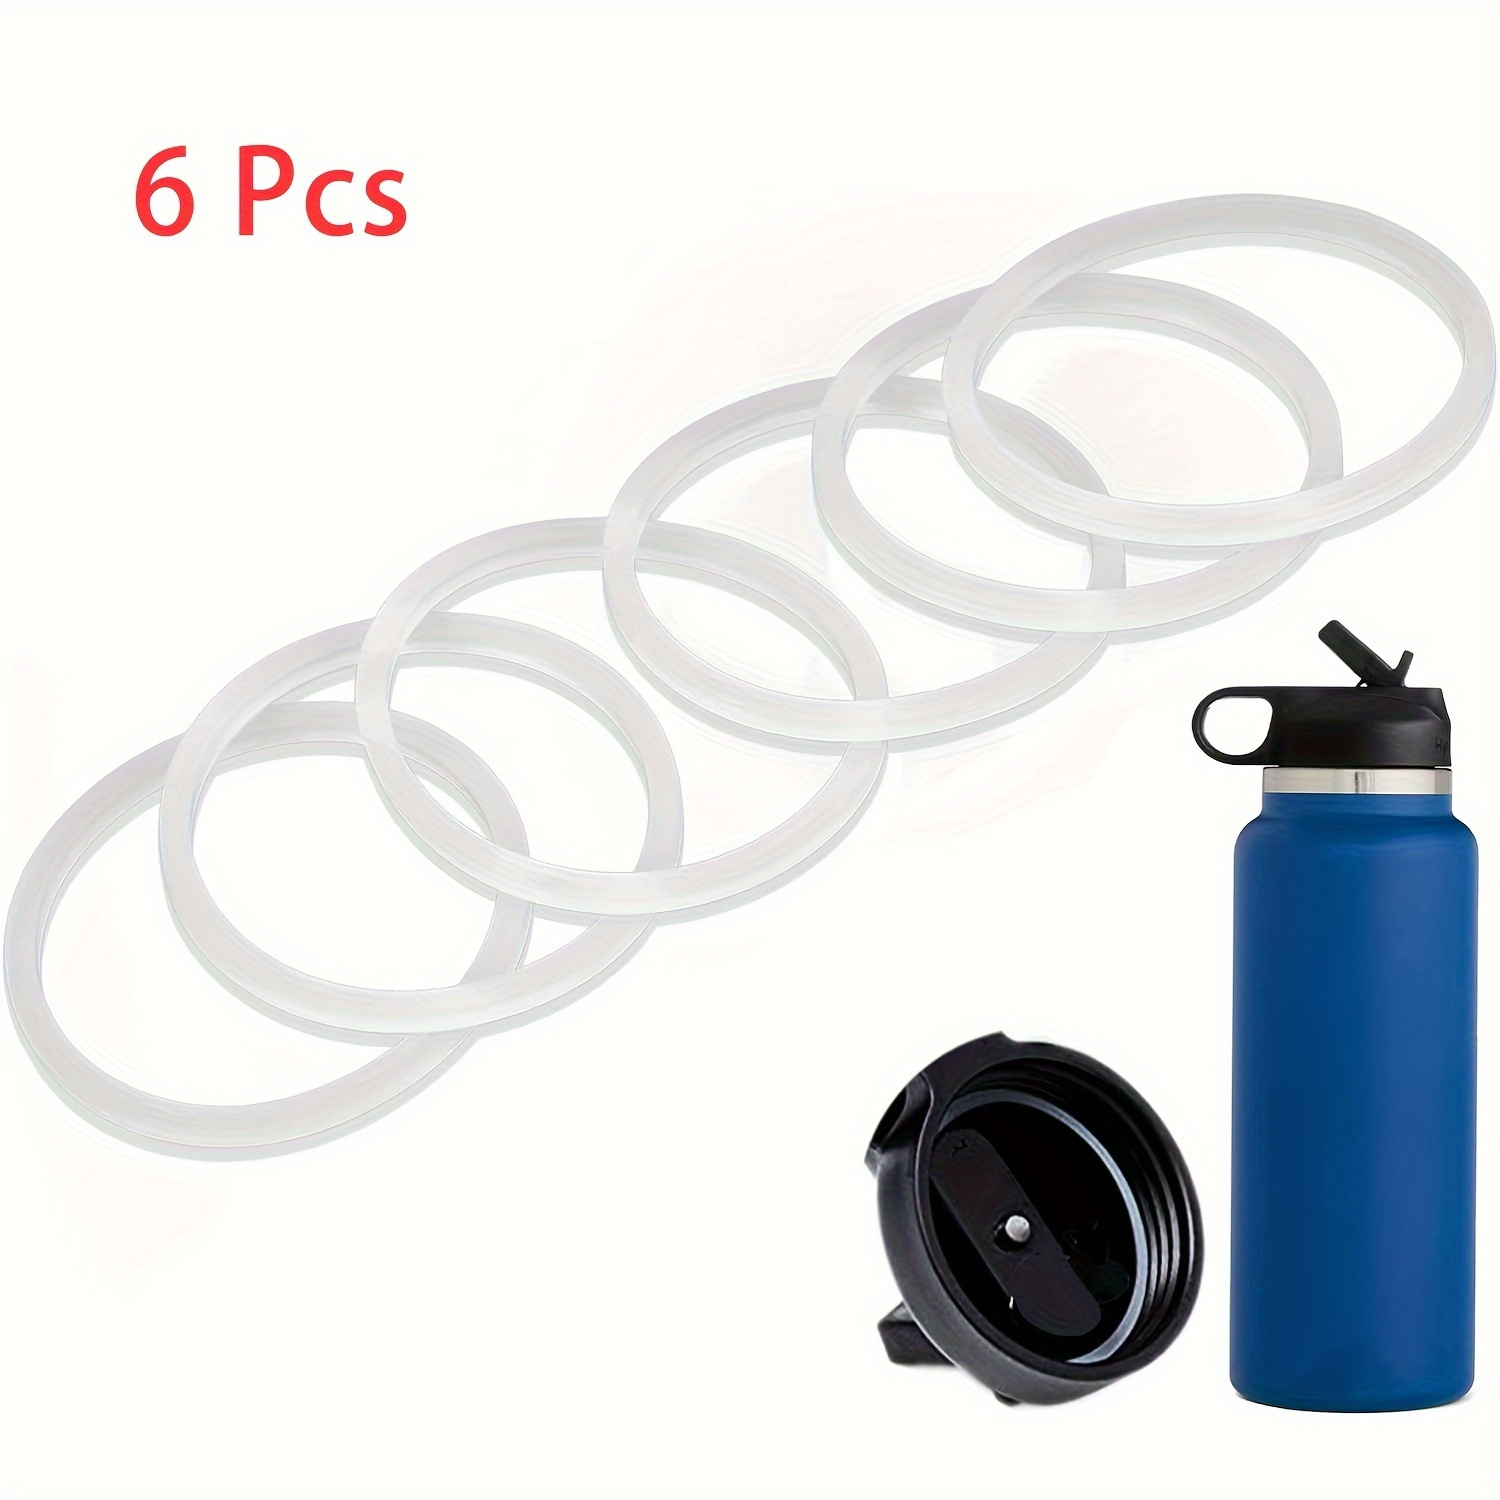 4pcs Silicone Sealing O-Ring Bottle Cover Stopper For Contigo Water Cup  Sealing Ring Travel Cup